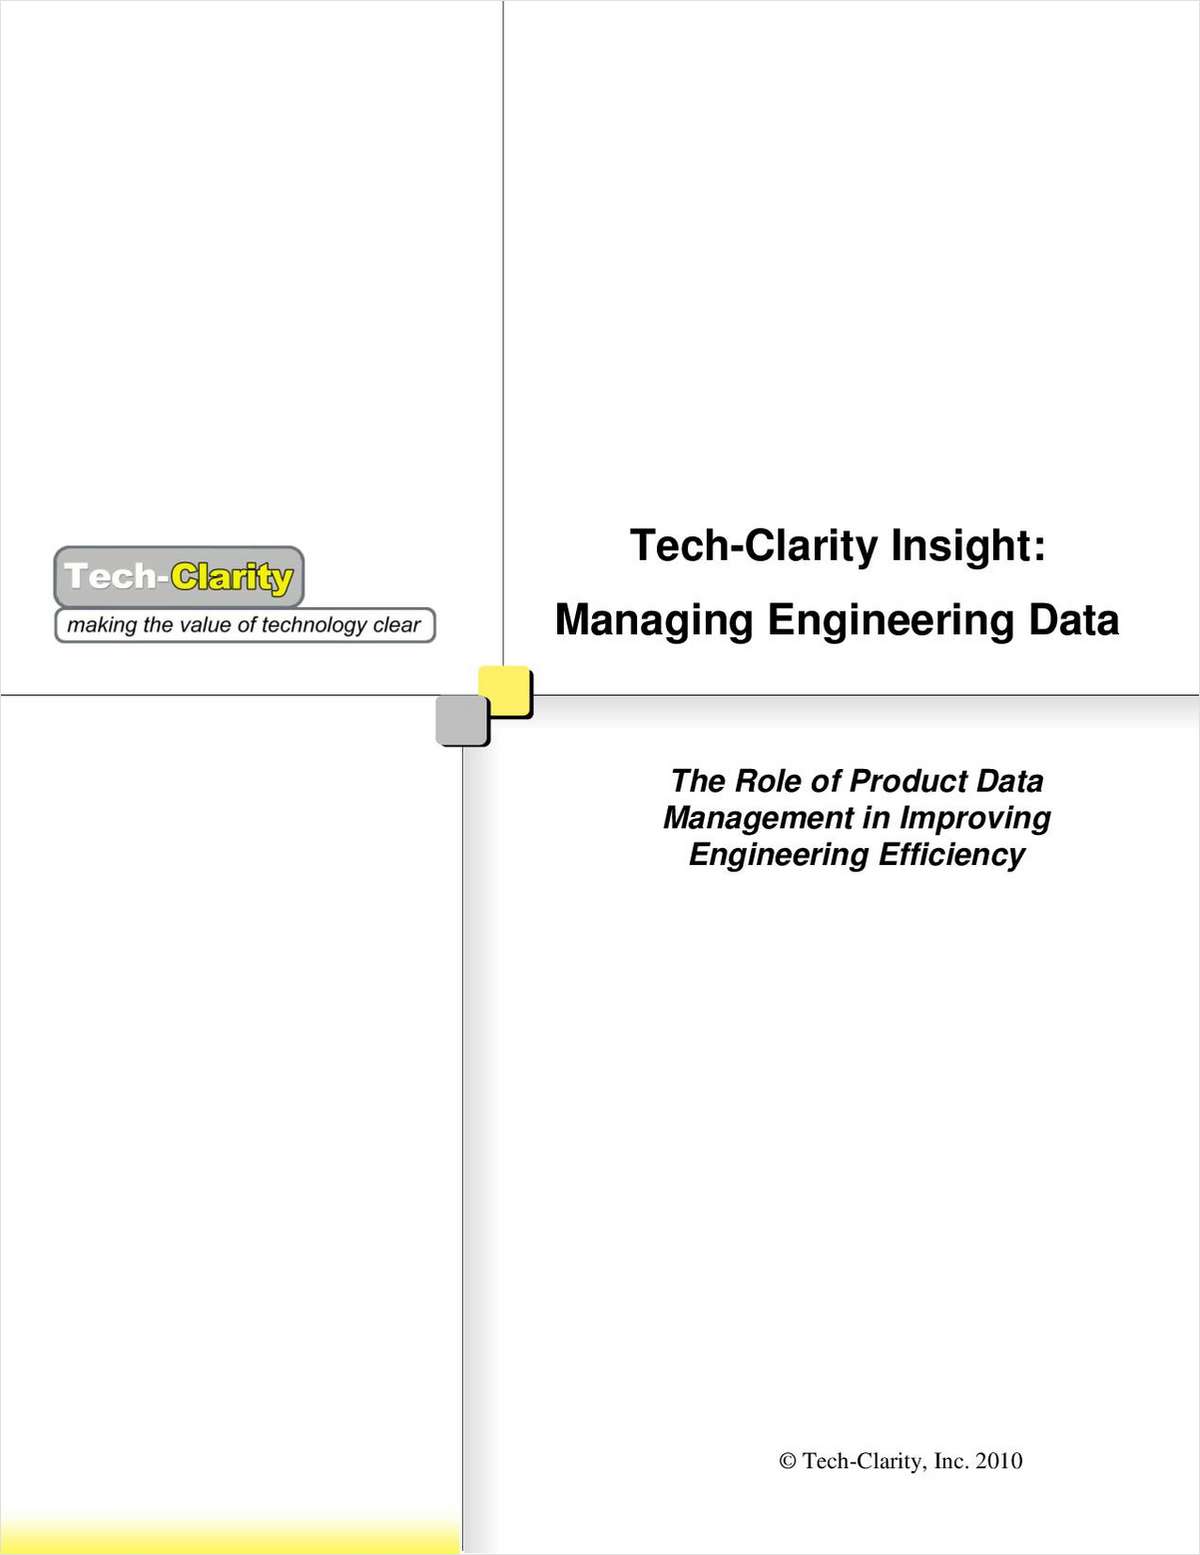 The Role of Product Data Management in Engineering Efficiency